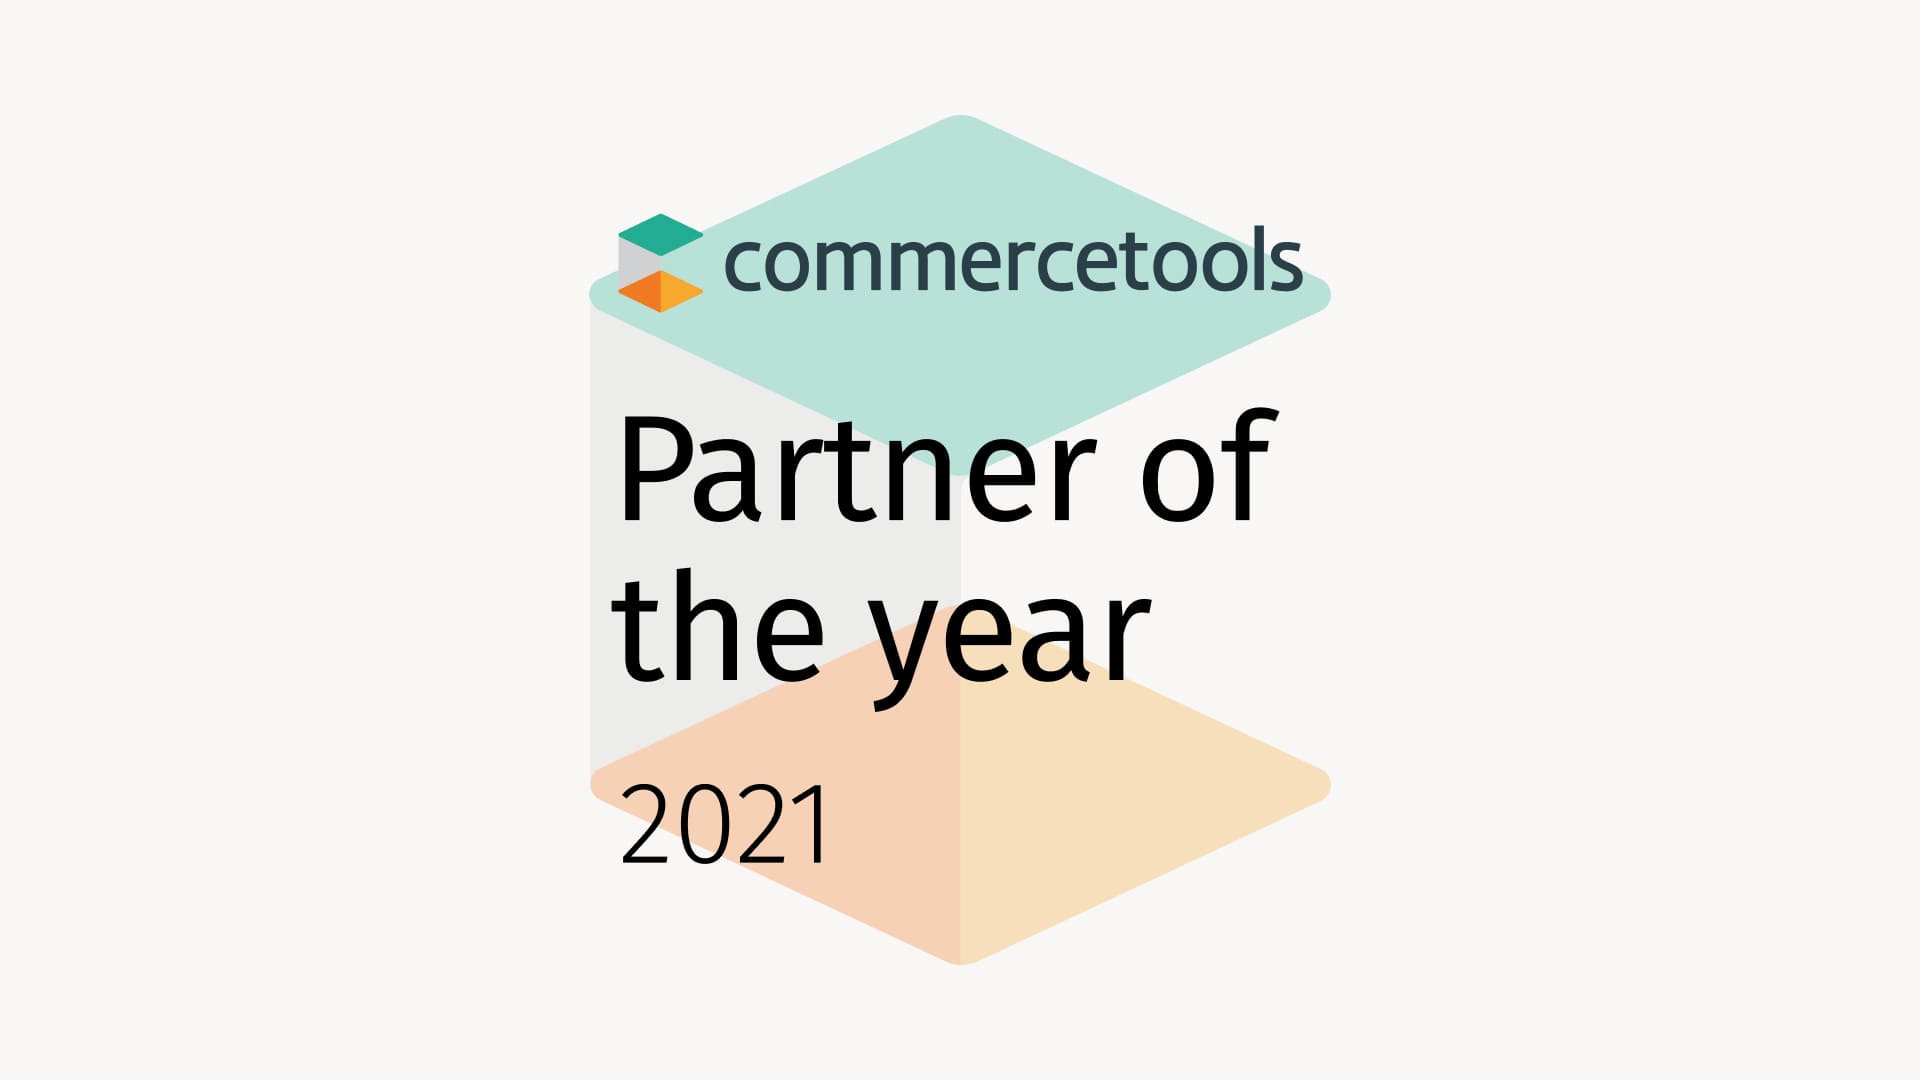 commercetools Composable Commerce Partner of the 2021 year logo